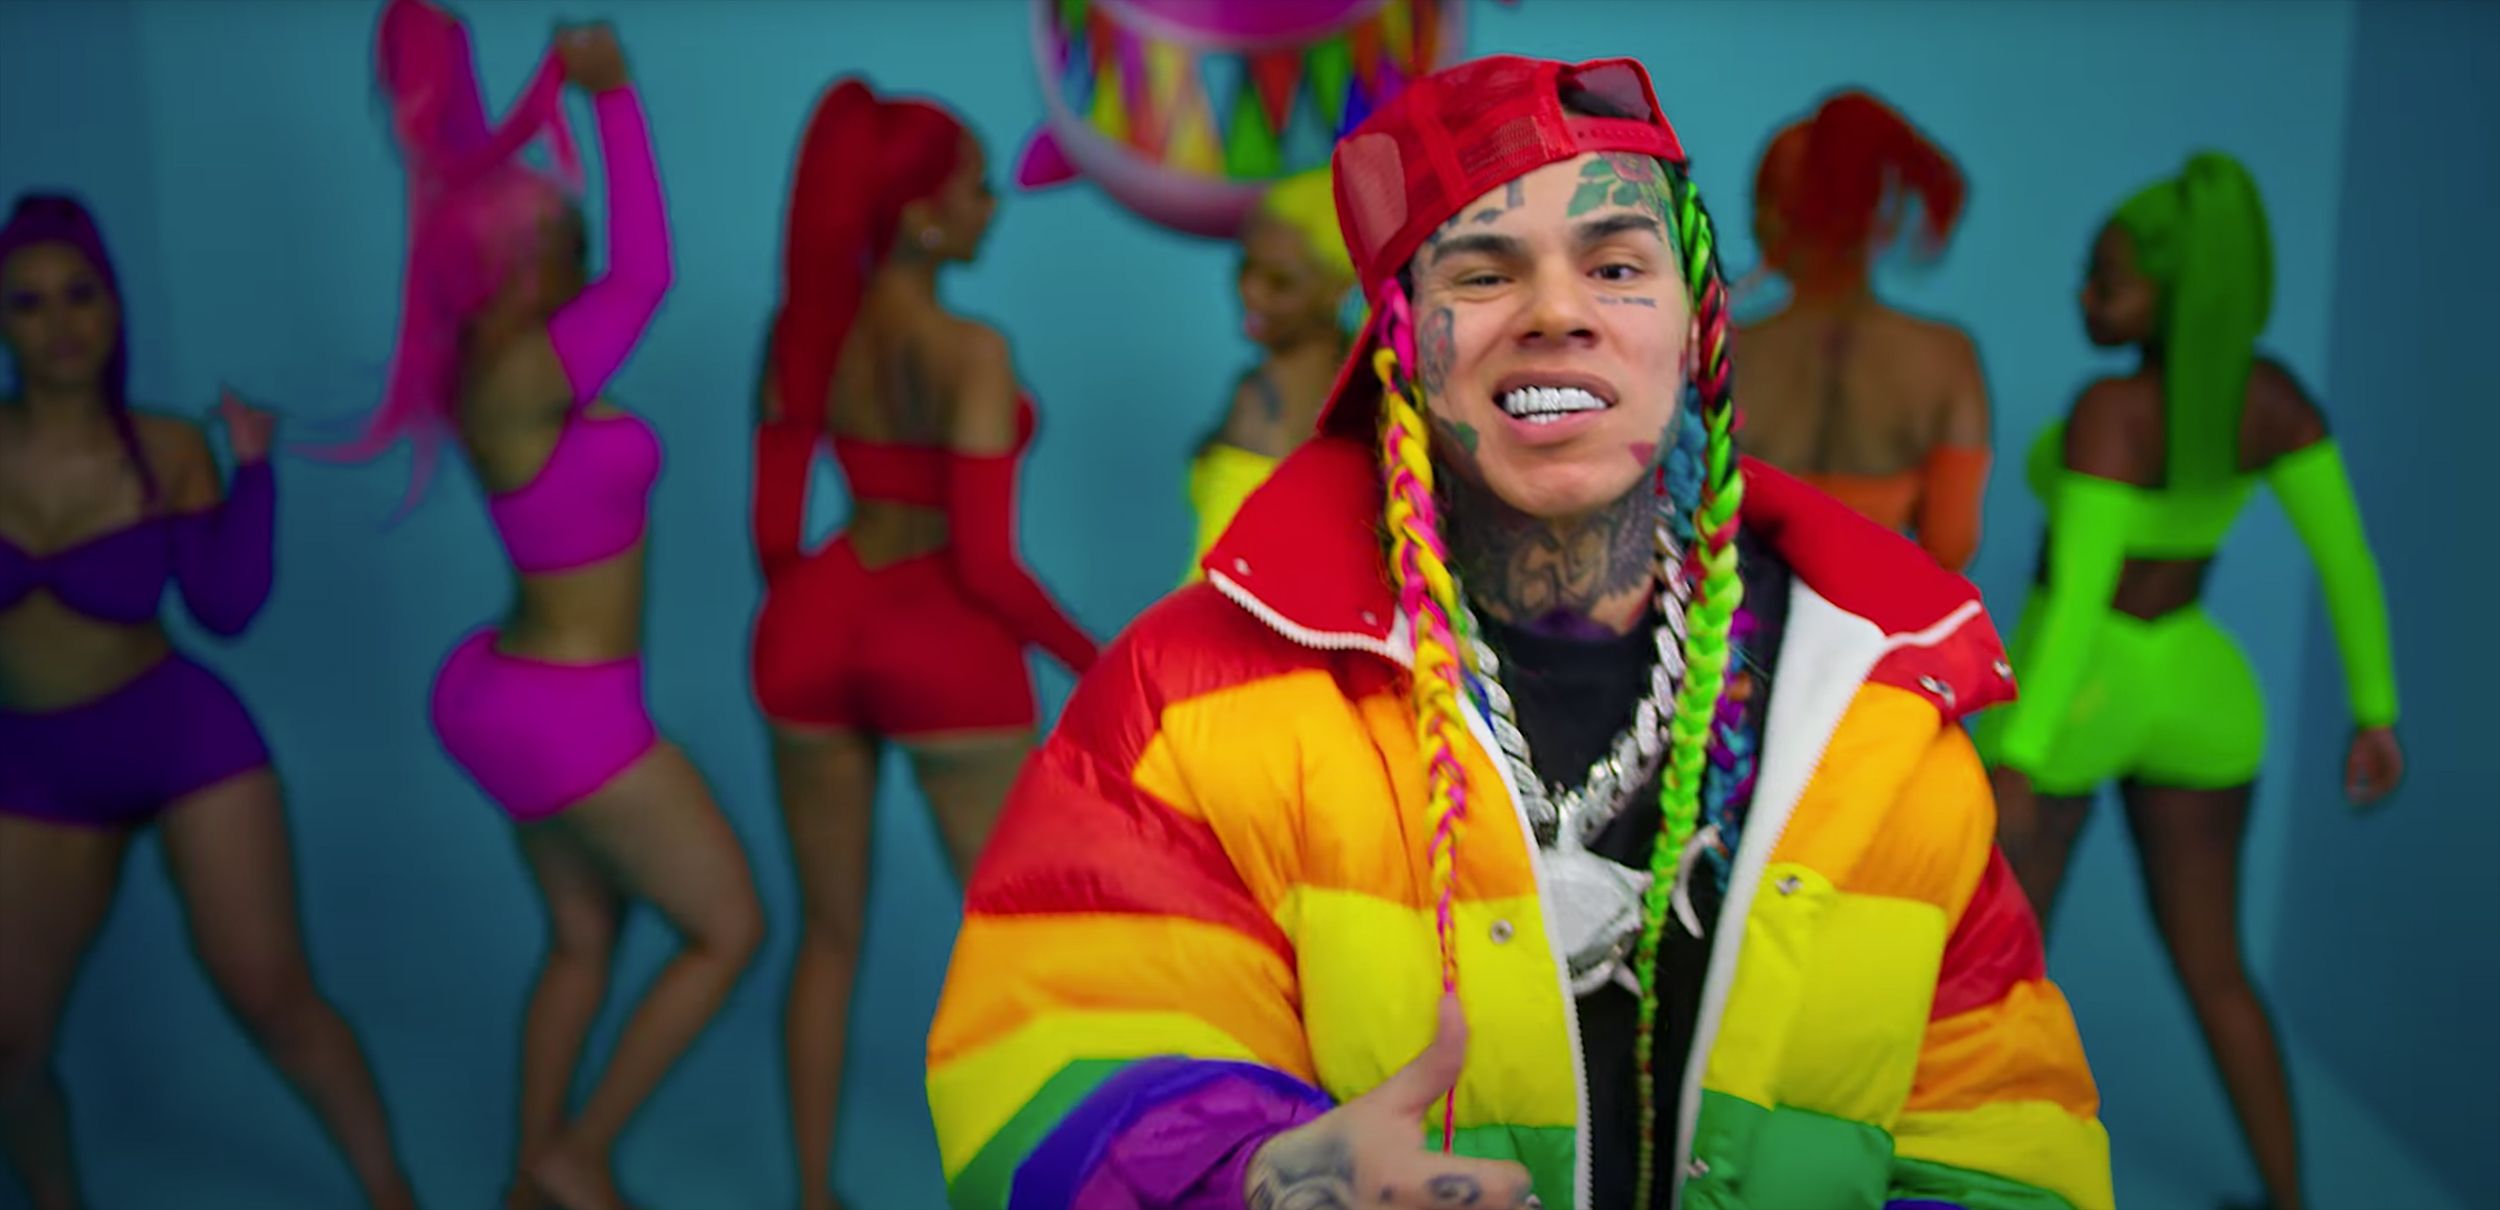 6ix9ine releases 'Gooba, ' his first new song since returning home